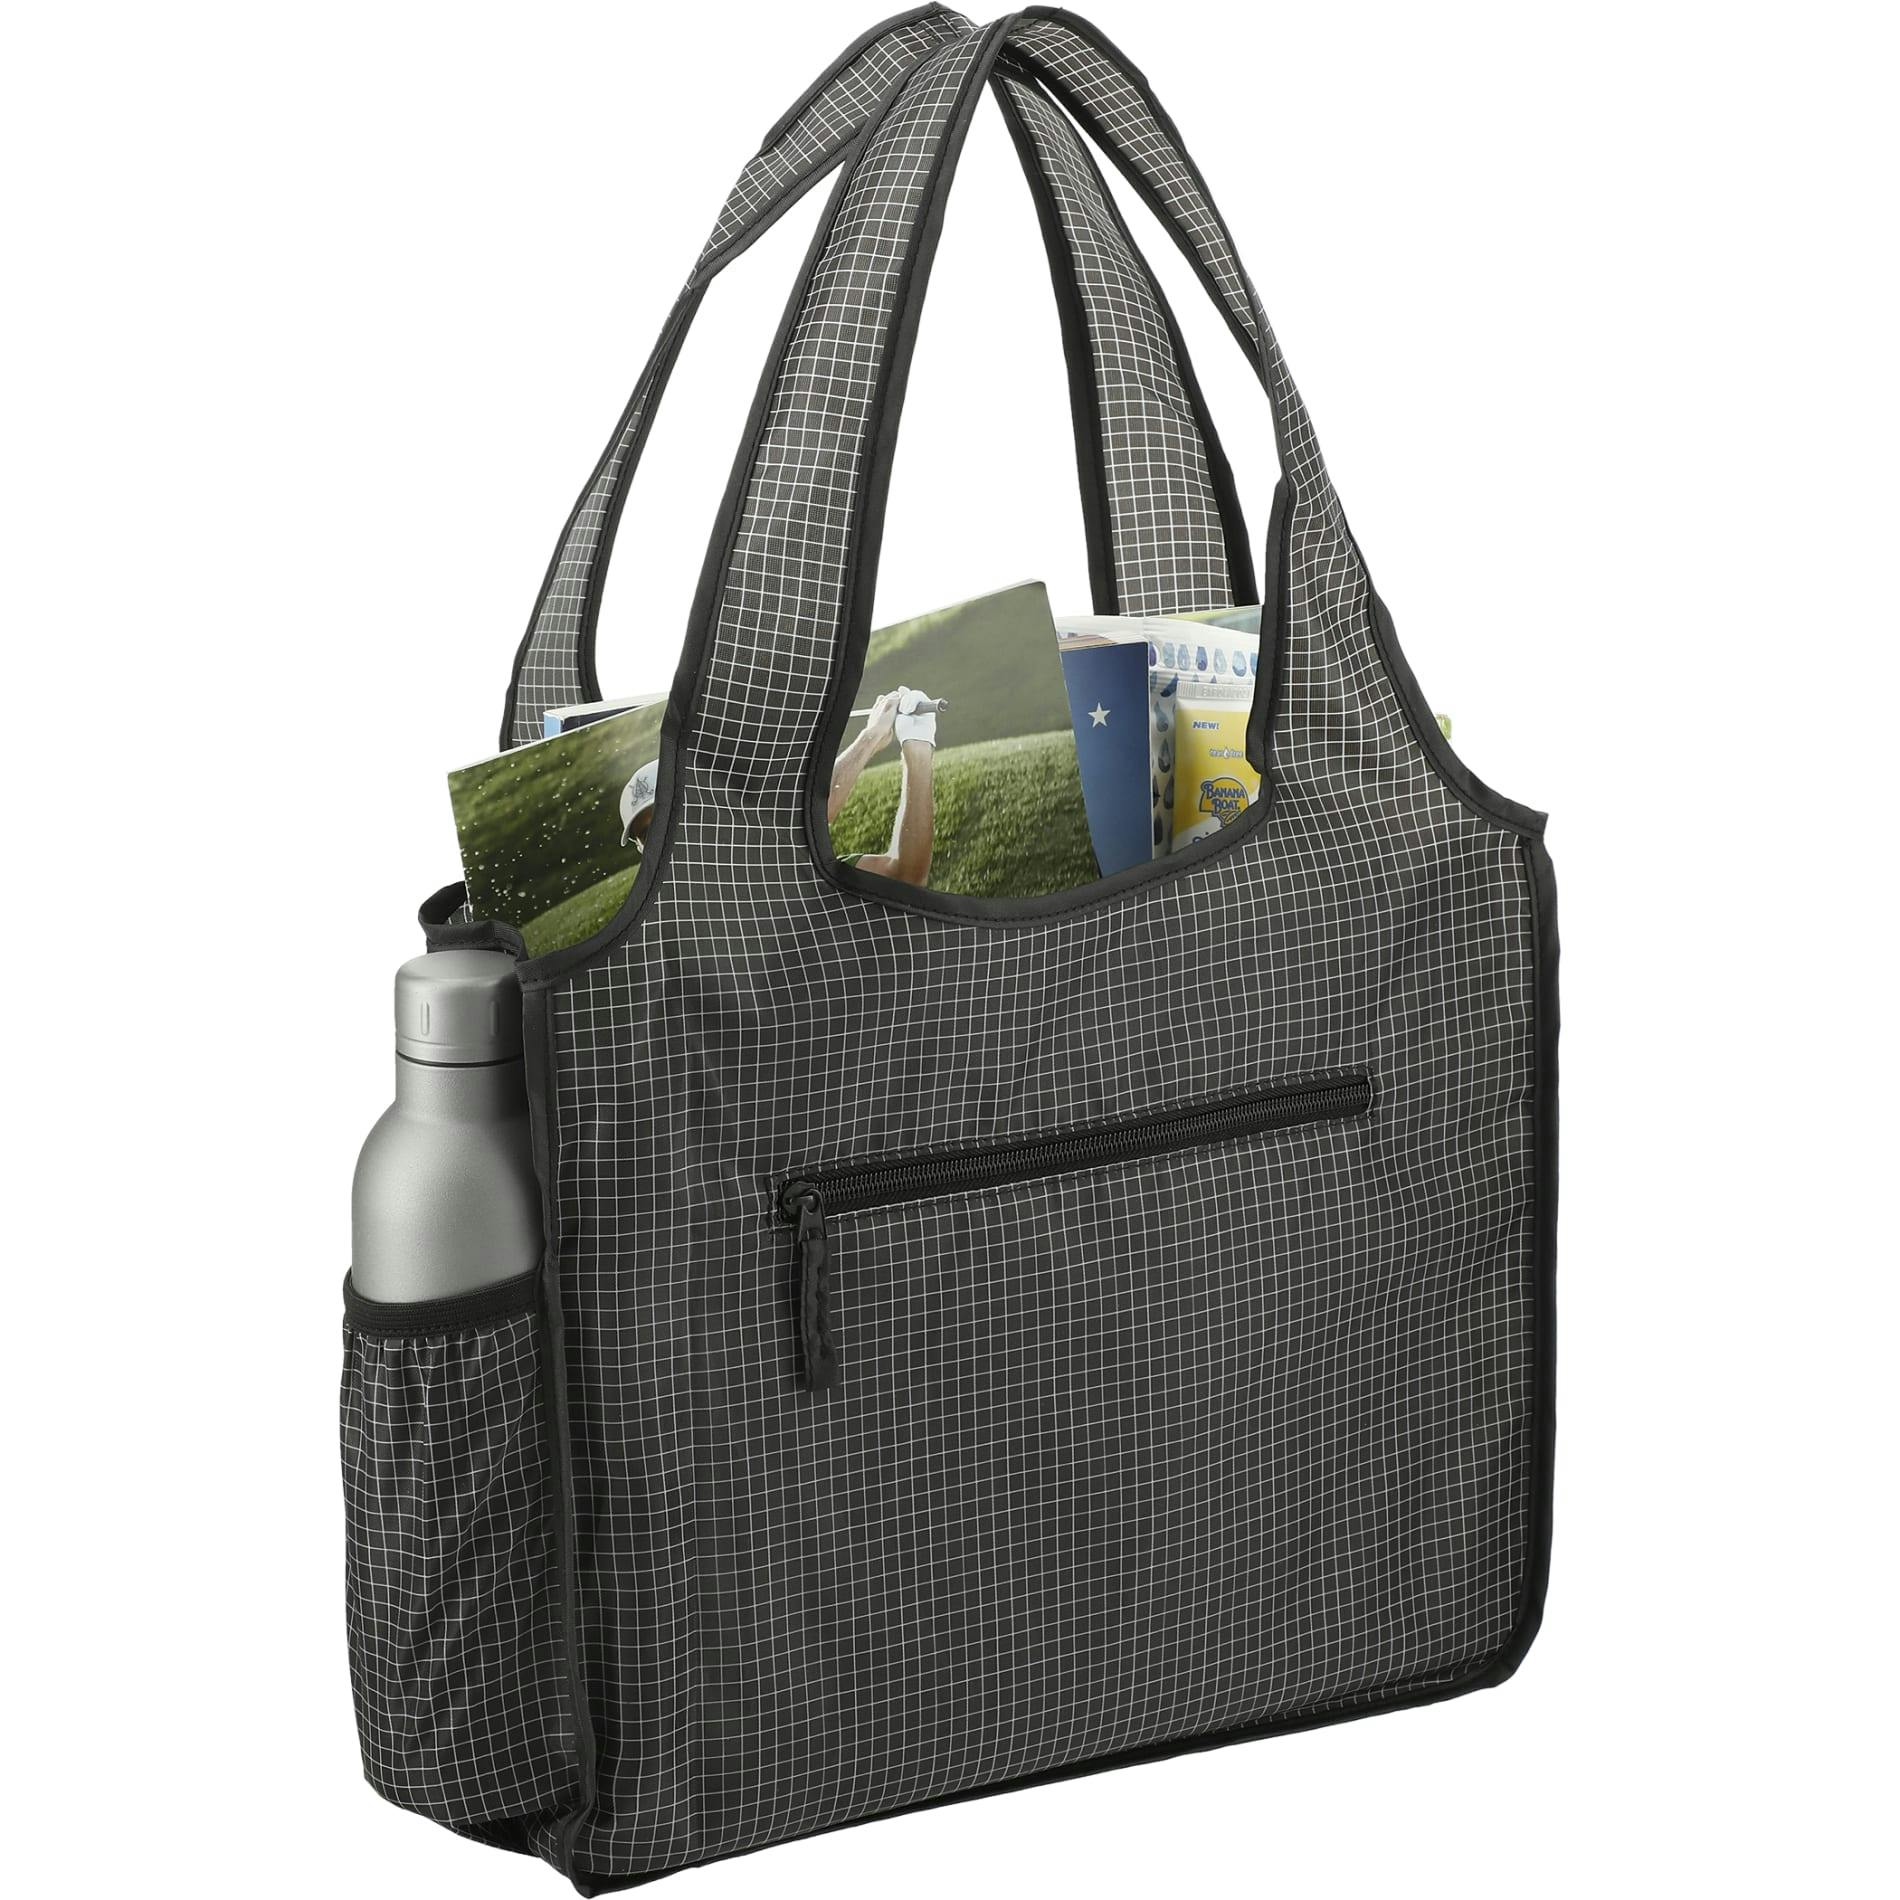 Grid Bungalow Tote - additional Image 3